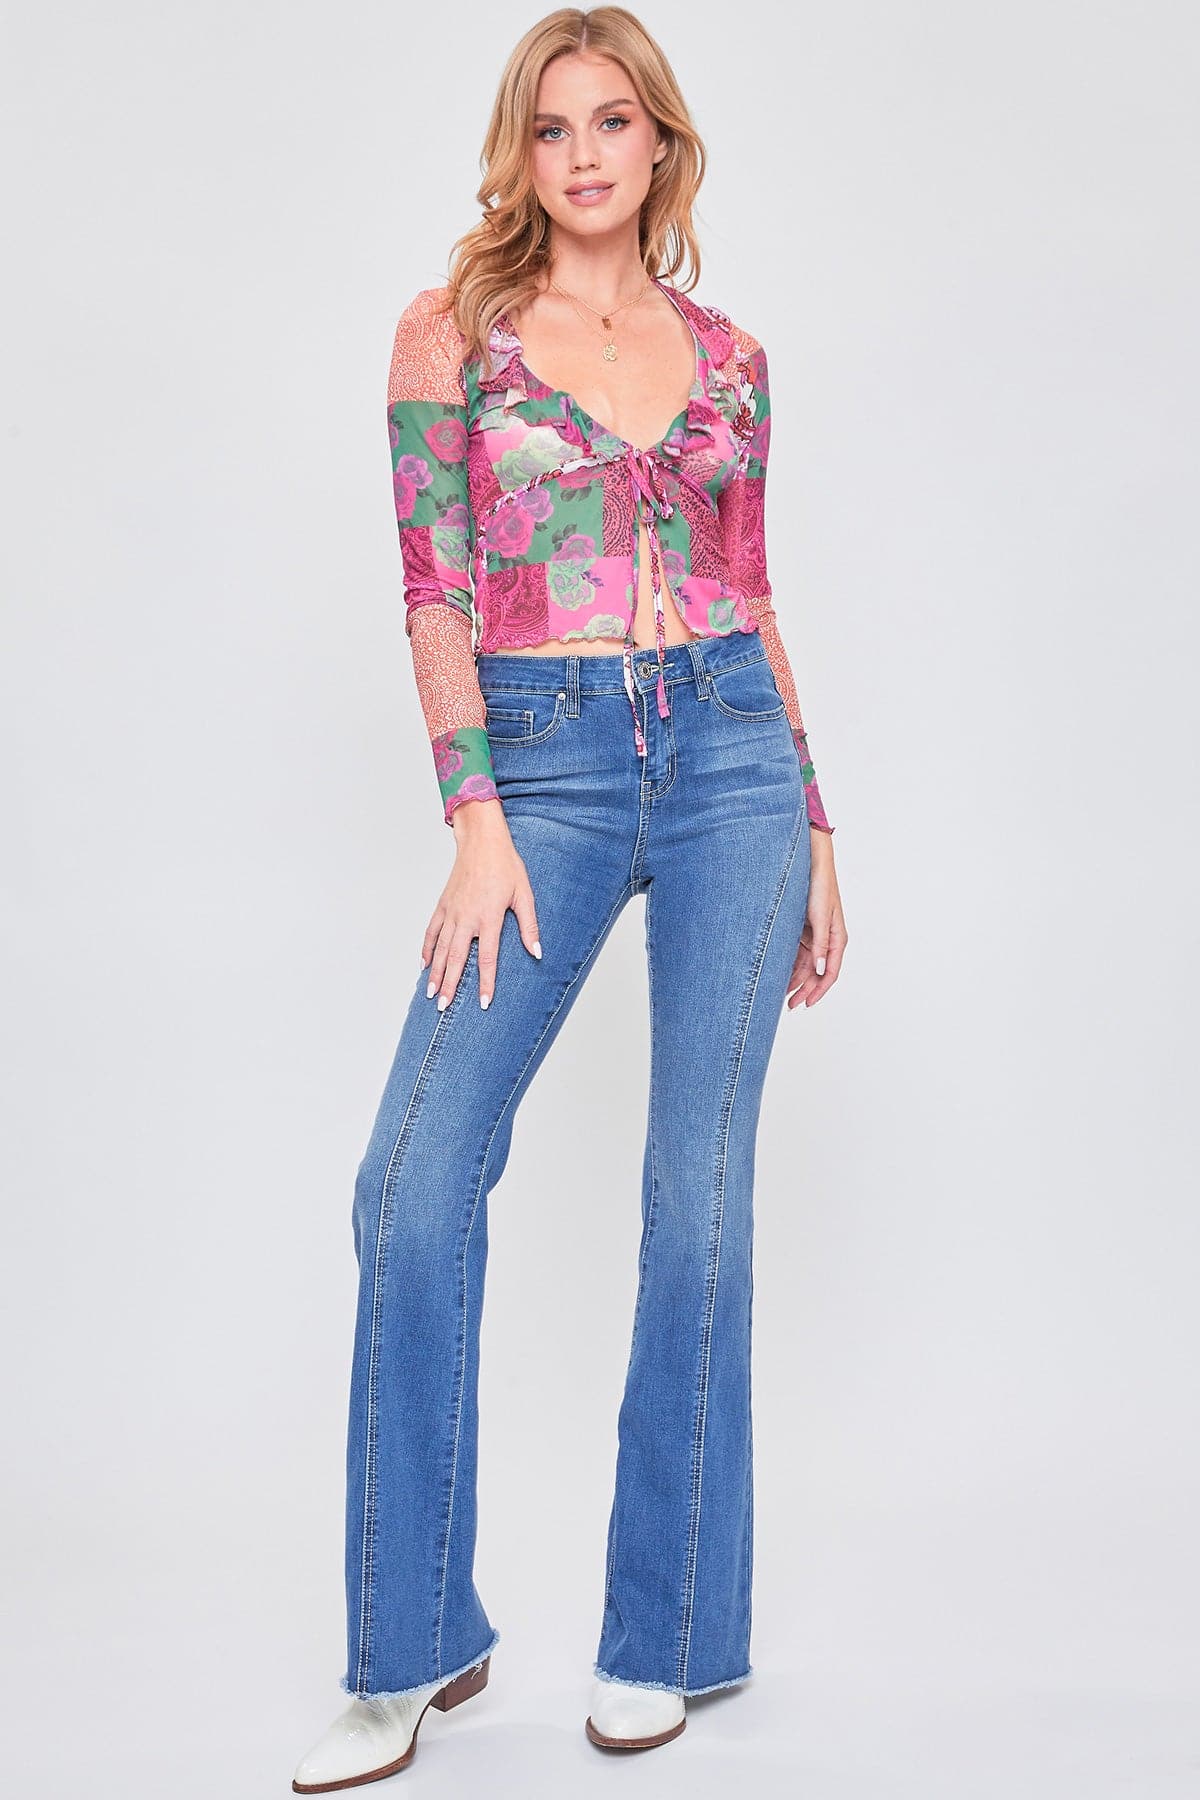 Women's Frayed Hem Flare Jeans With Curved Front Seam